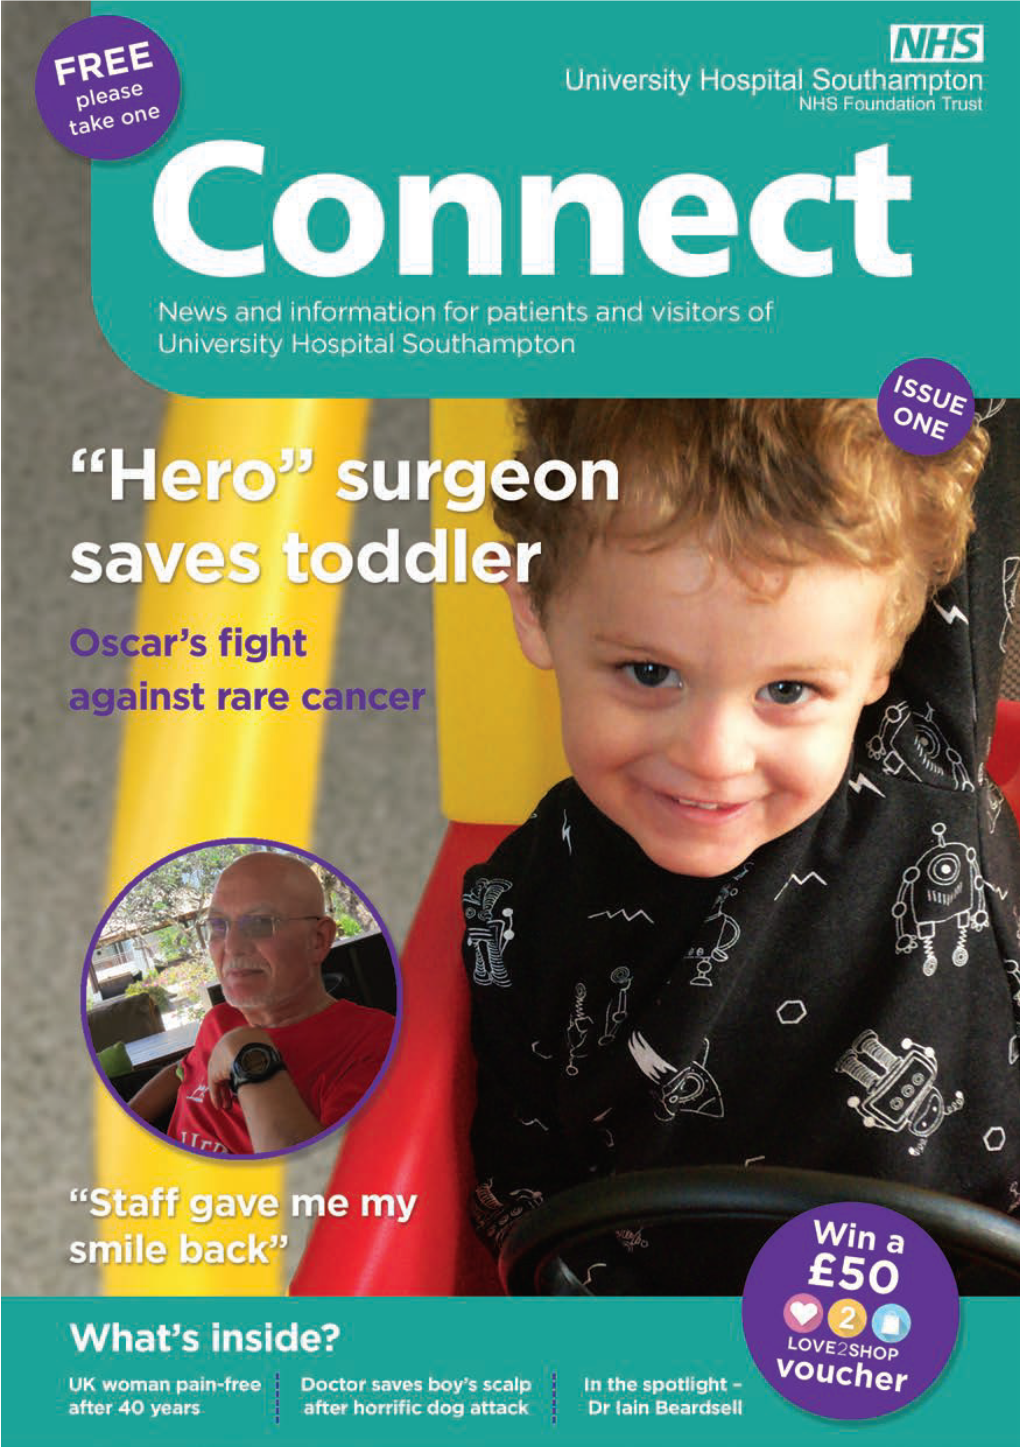 Issue One of Connect